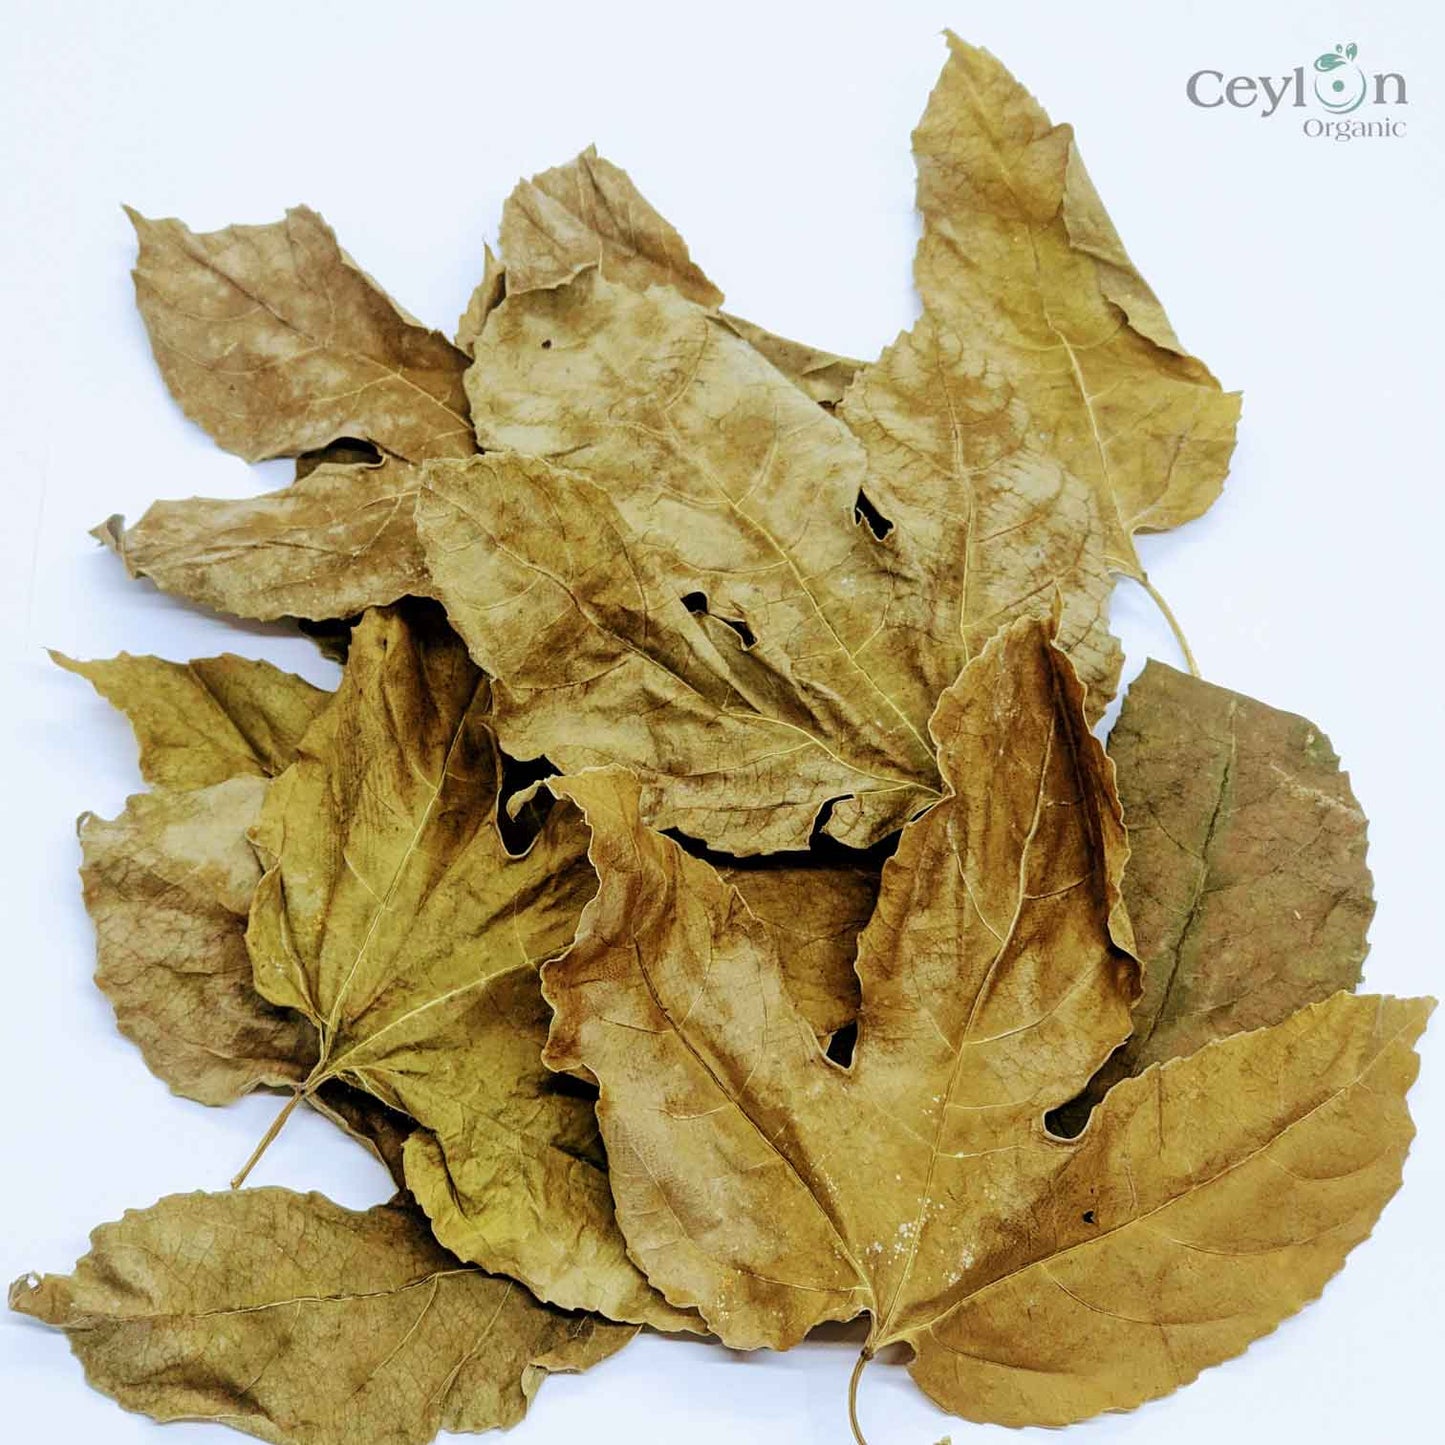 500+ Passion Fruit,Dried Passion Fruit Leaves,Dried Natural Passion Fruit Leaves | Ceylon organic-6